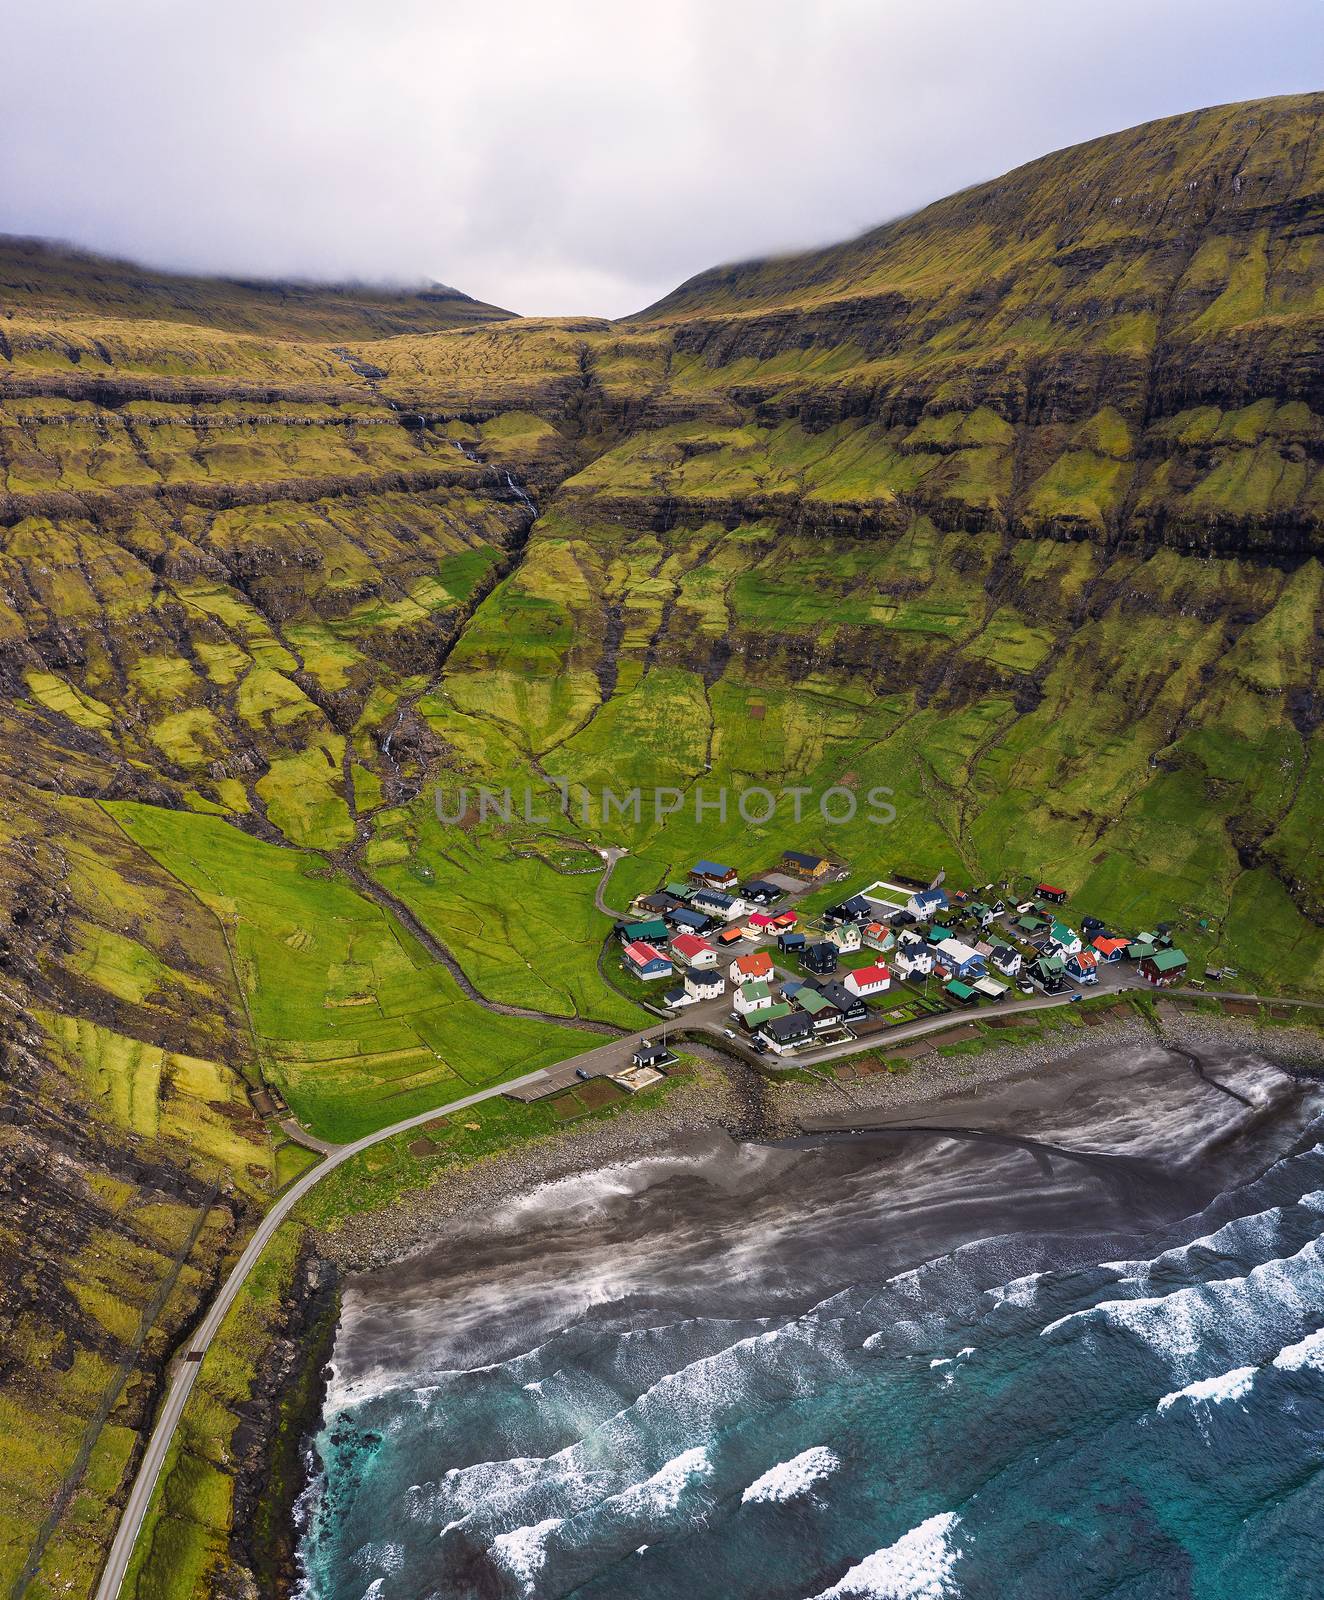 Aerial view of the Tjornuvik village and its beach located at a beautiful bay in the Faroe Islands, Denmark.